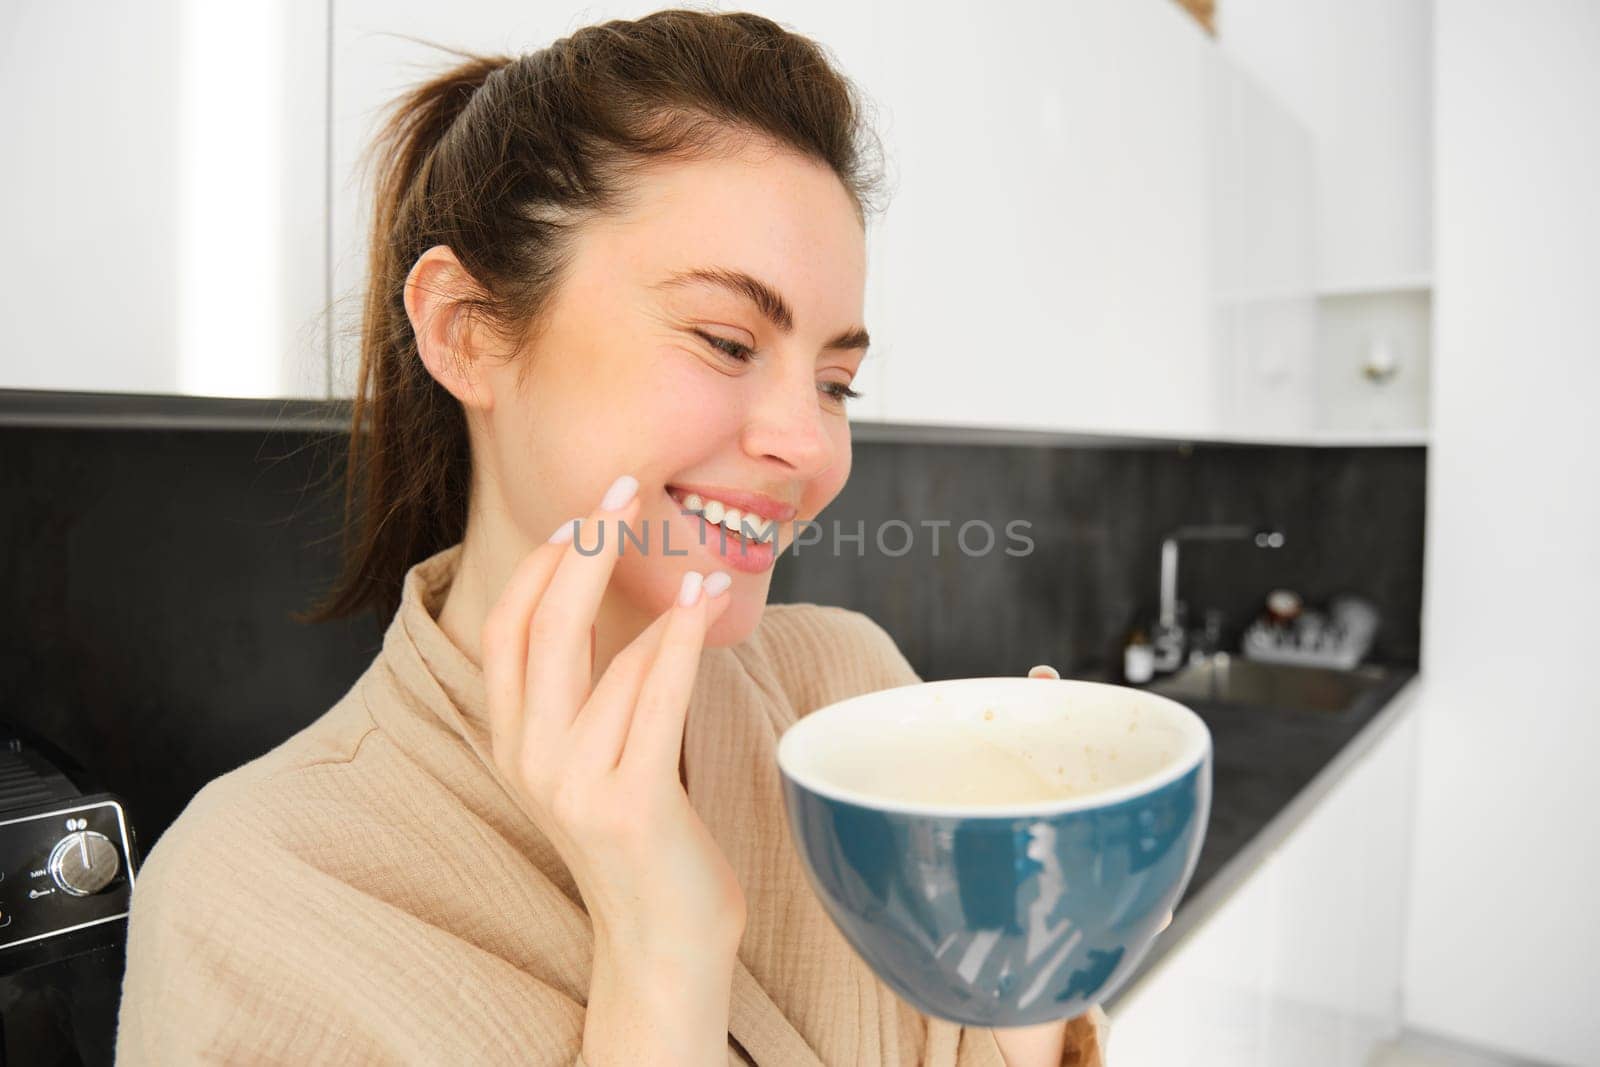 Close up portrait of happy young woman drinking coffee in the kitchen, laughing and smiling.